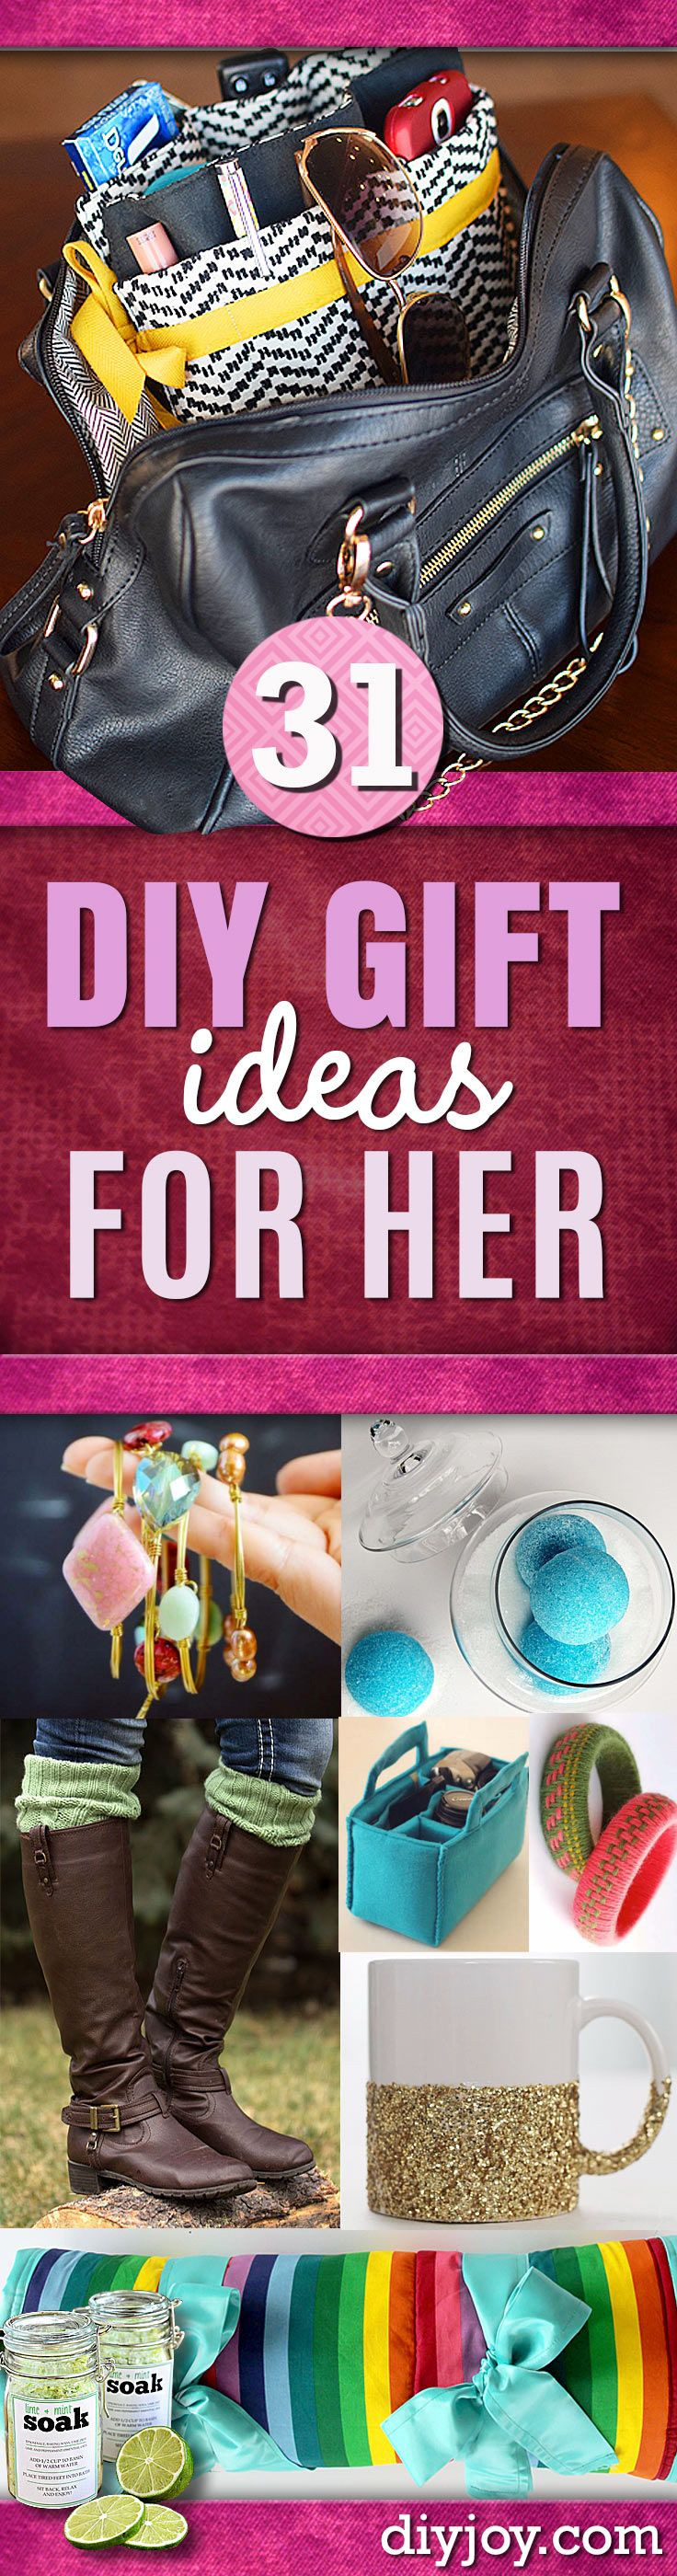 DIY Christmas Gifts For Wife
 17 Best ideas about Homemade Gifts For Girlfriend on